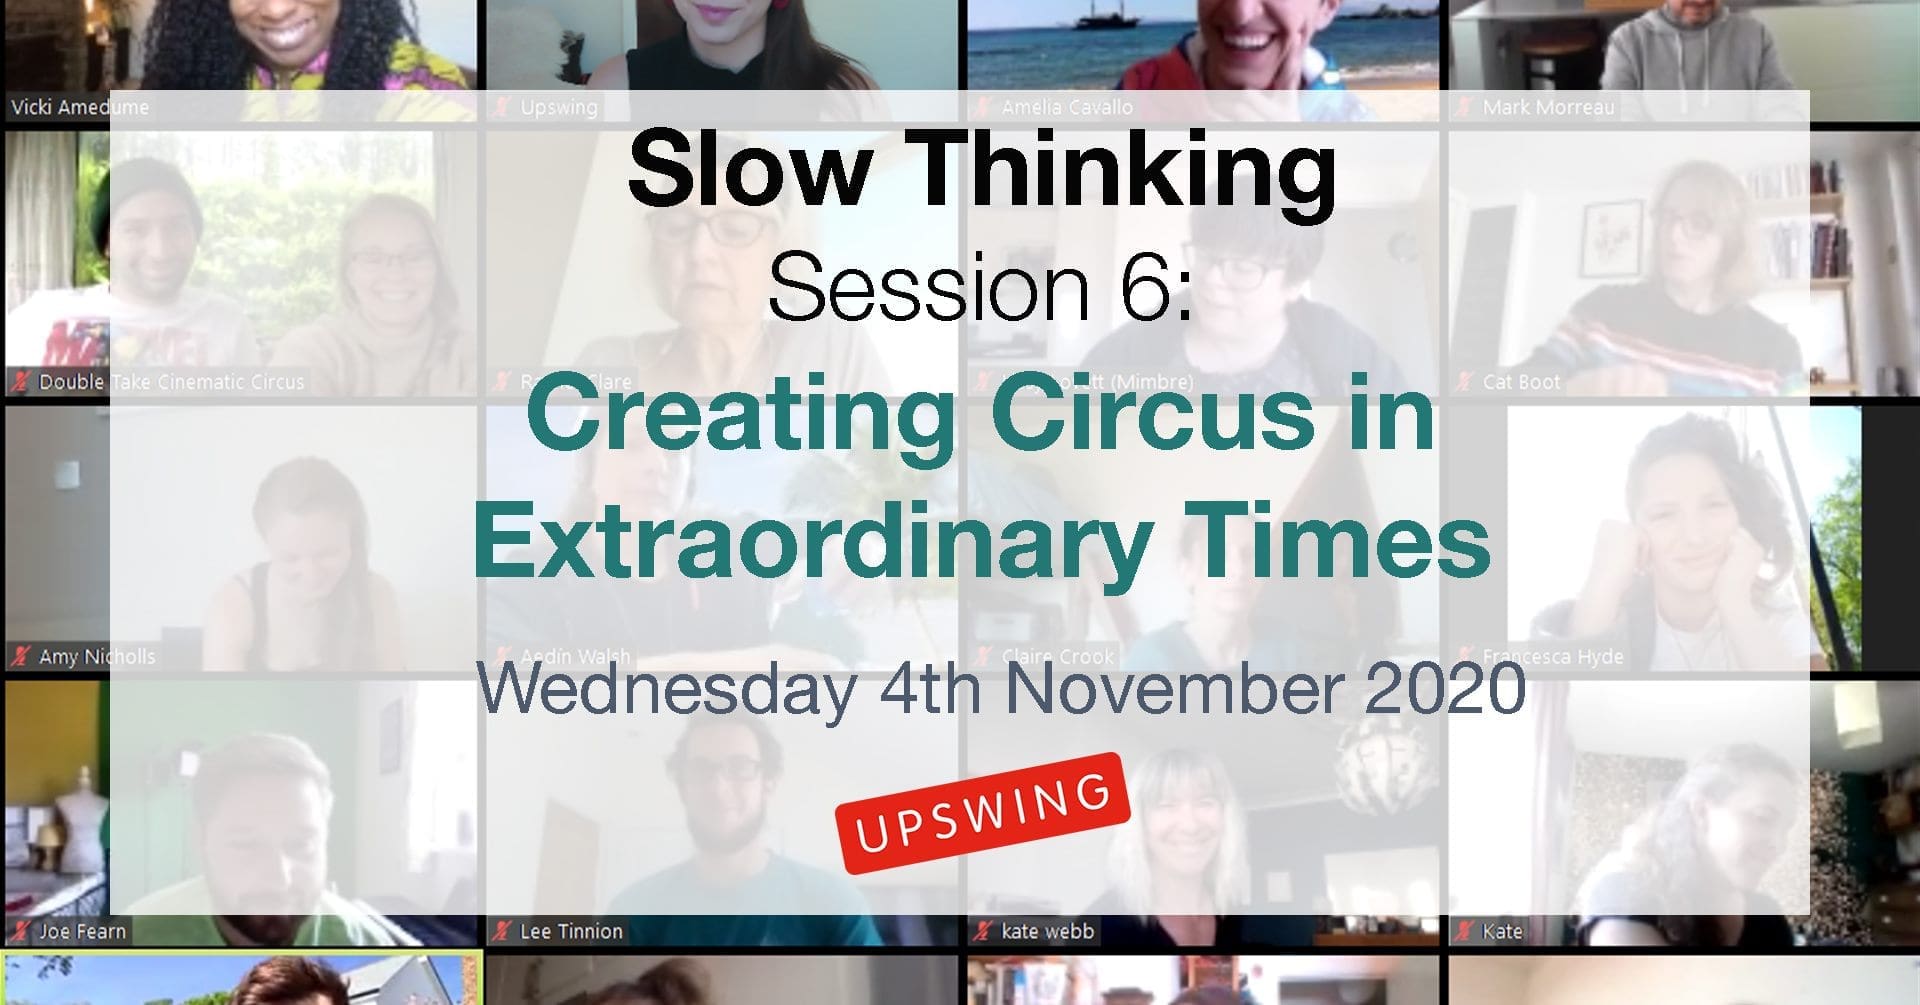 A screen-shot of a zoom meeting. "Slow Thinking Session 6, Creating Circus In Extraordinary Times, Wednesday 4th November 2020, Upswing" is readable on top.